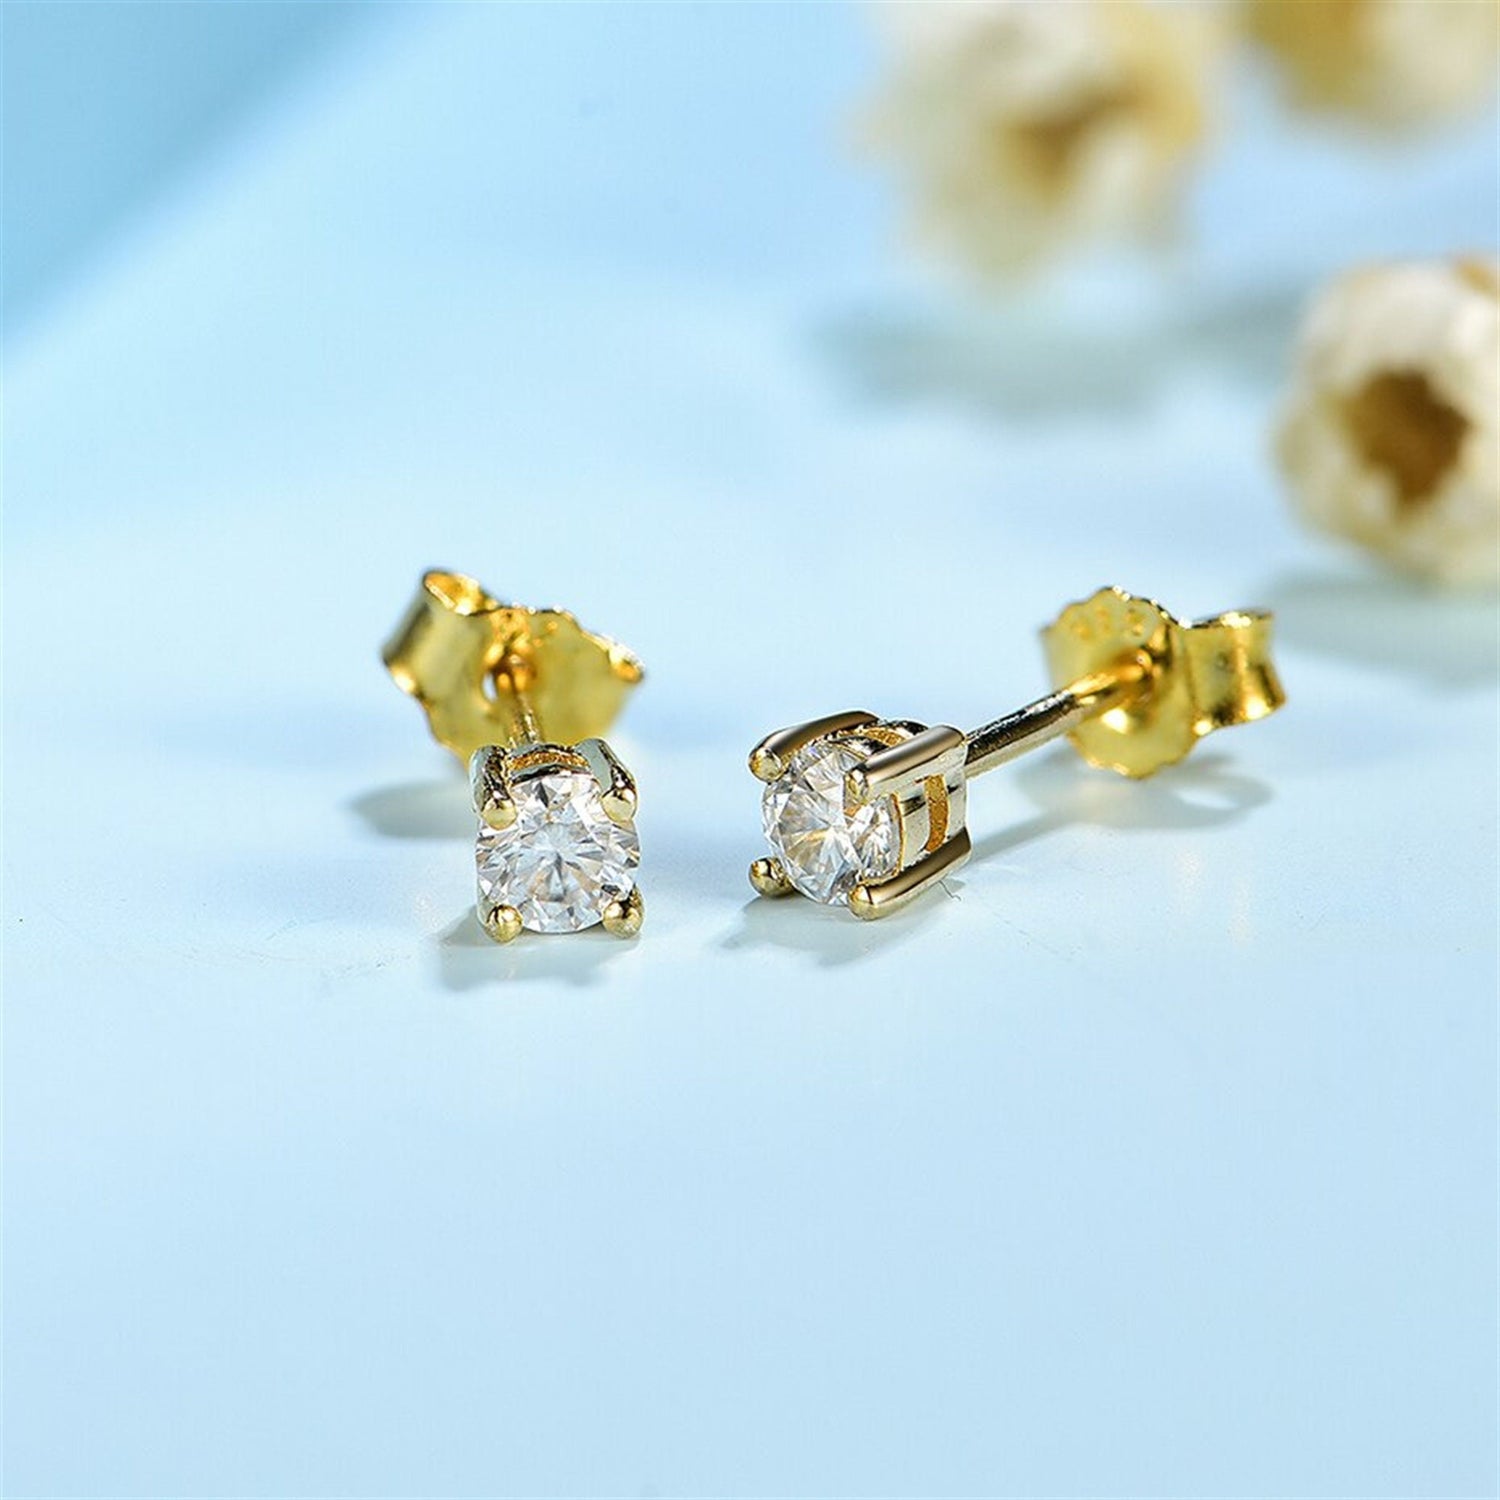 Moissanite Stud Earrings, Solid 925 Sterling Silver with 585 Gold Plating, Dainty Stud Earrings for Women